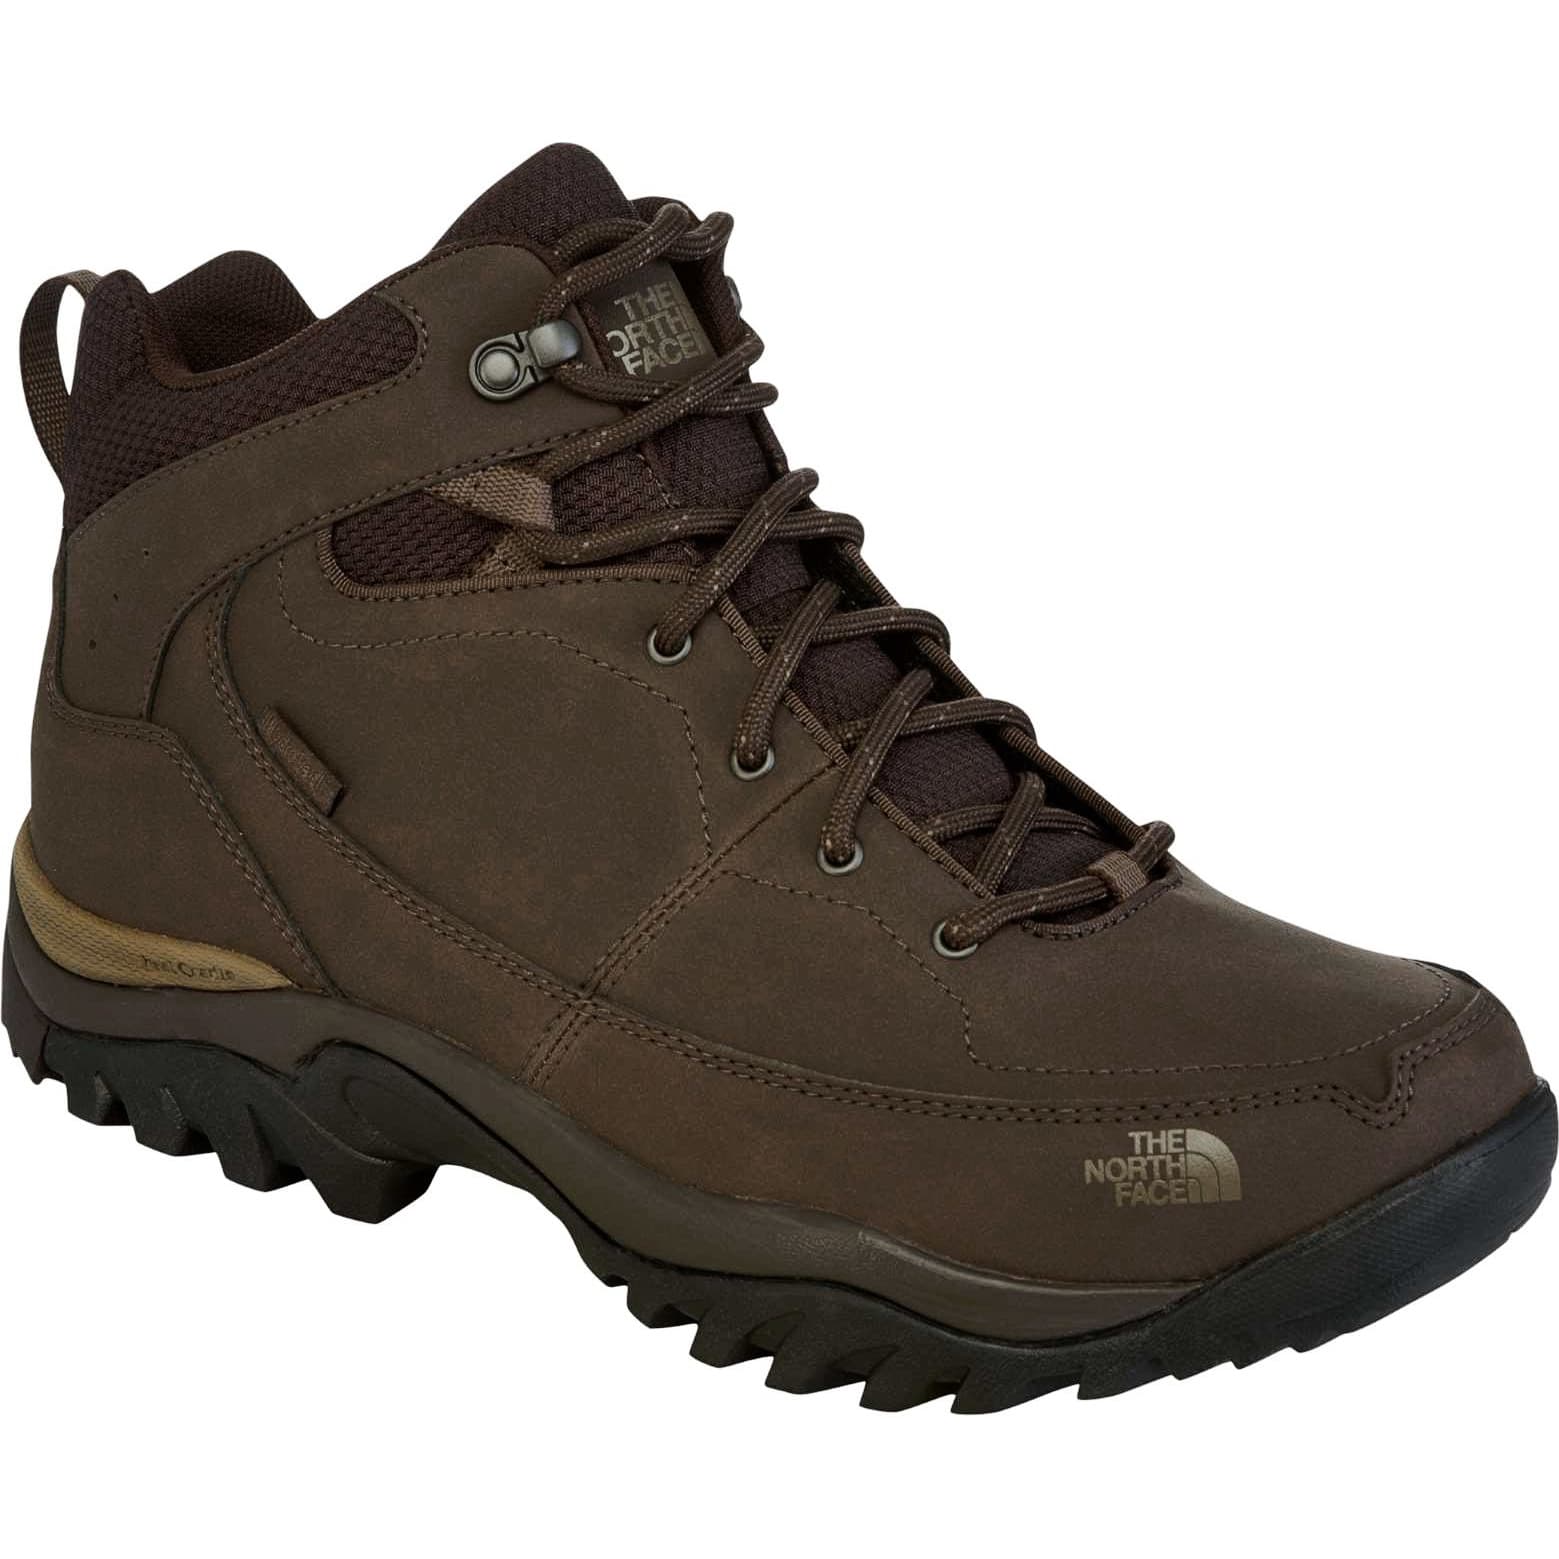 Buy The North Face Men's Snowstrike II 